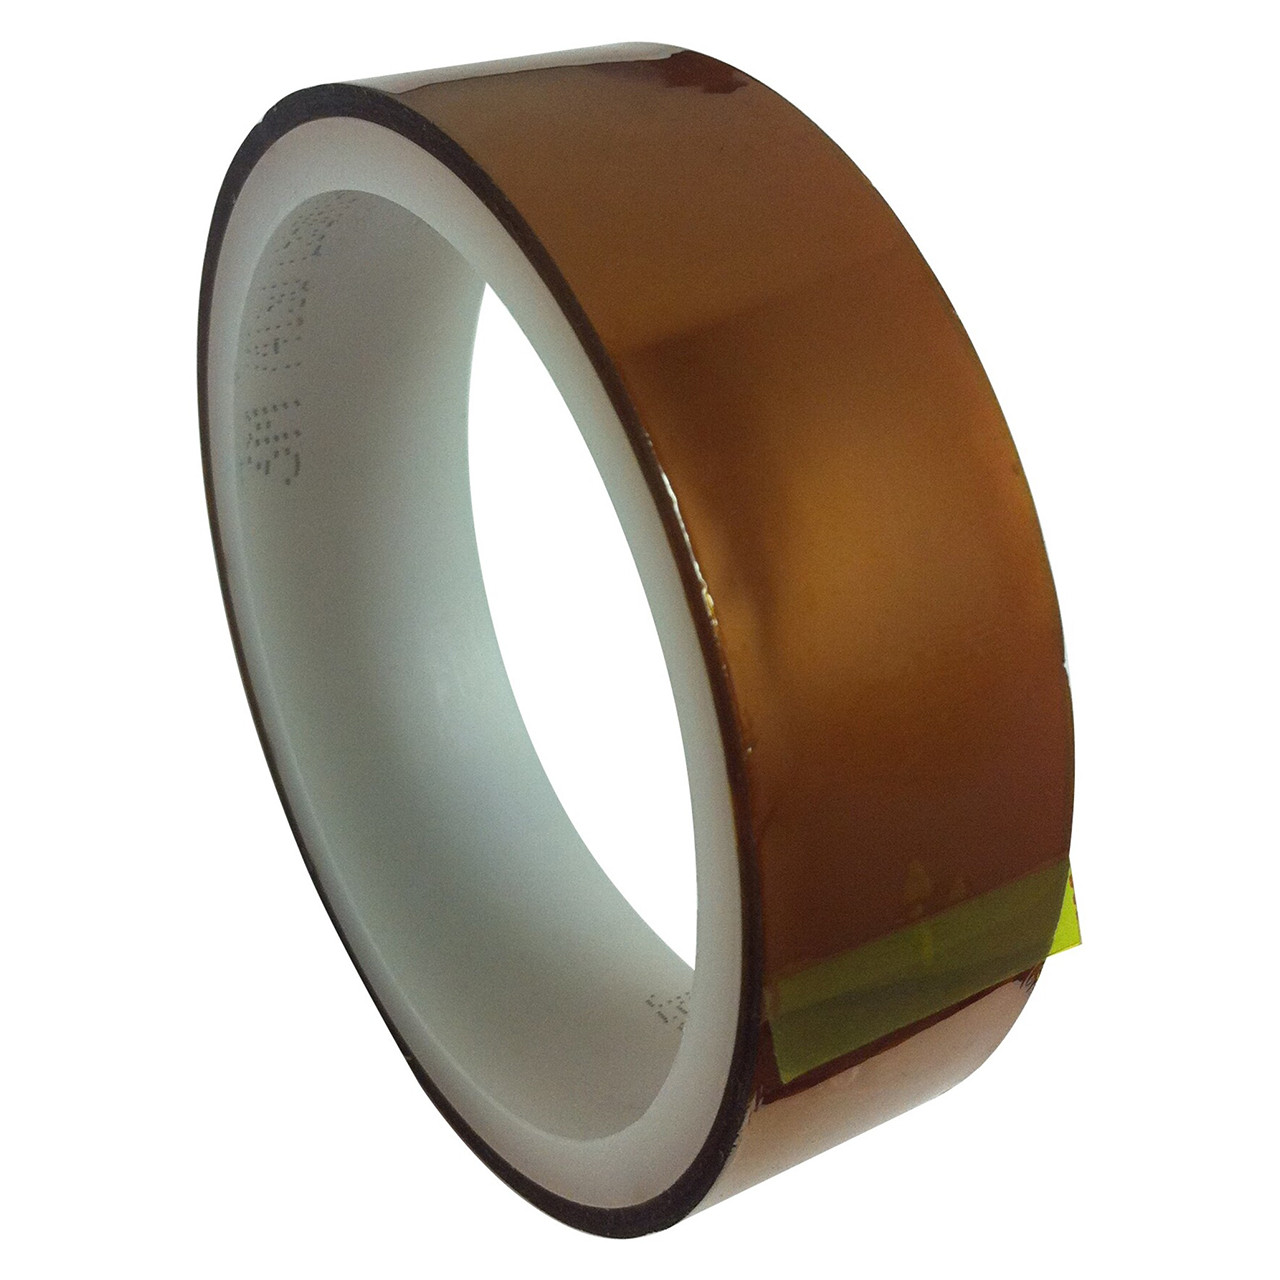 Kapton Polyimide Adhesive Tape, 3 Core, 1 Mil Thick, 36 yd Length, 1 Width